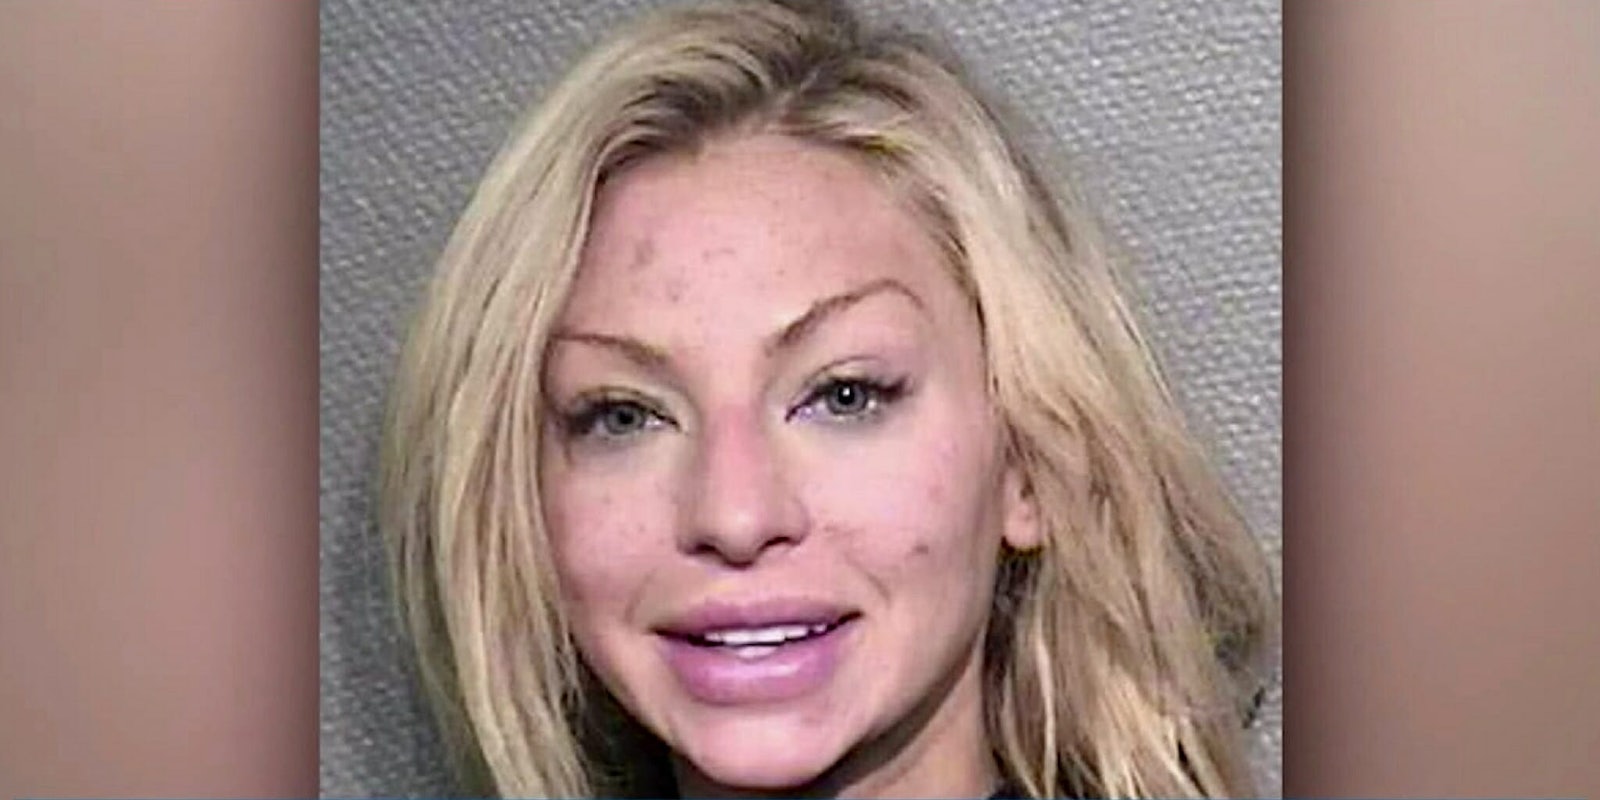 Lindy Lou Layman's booking photo after being arrested for causing damage to a date's home